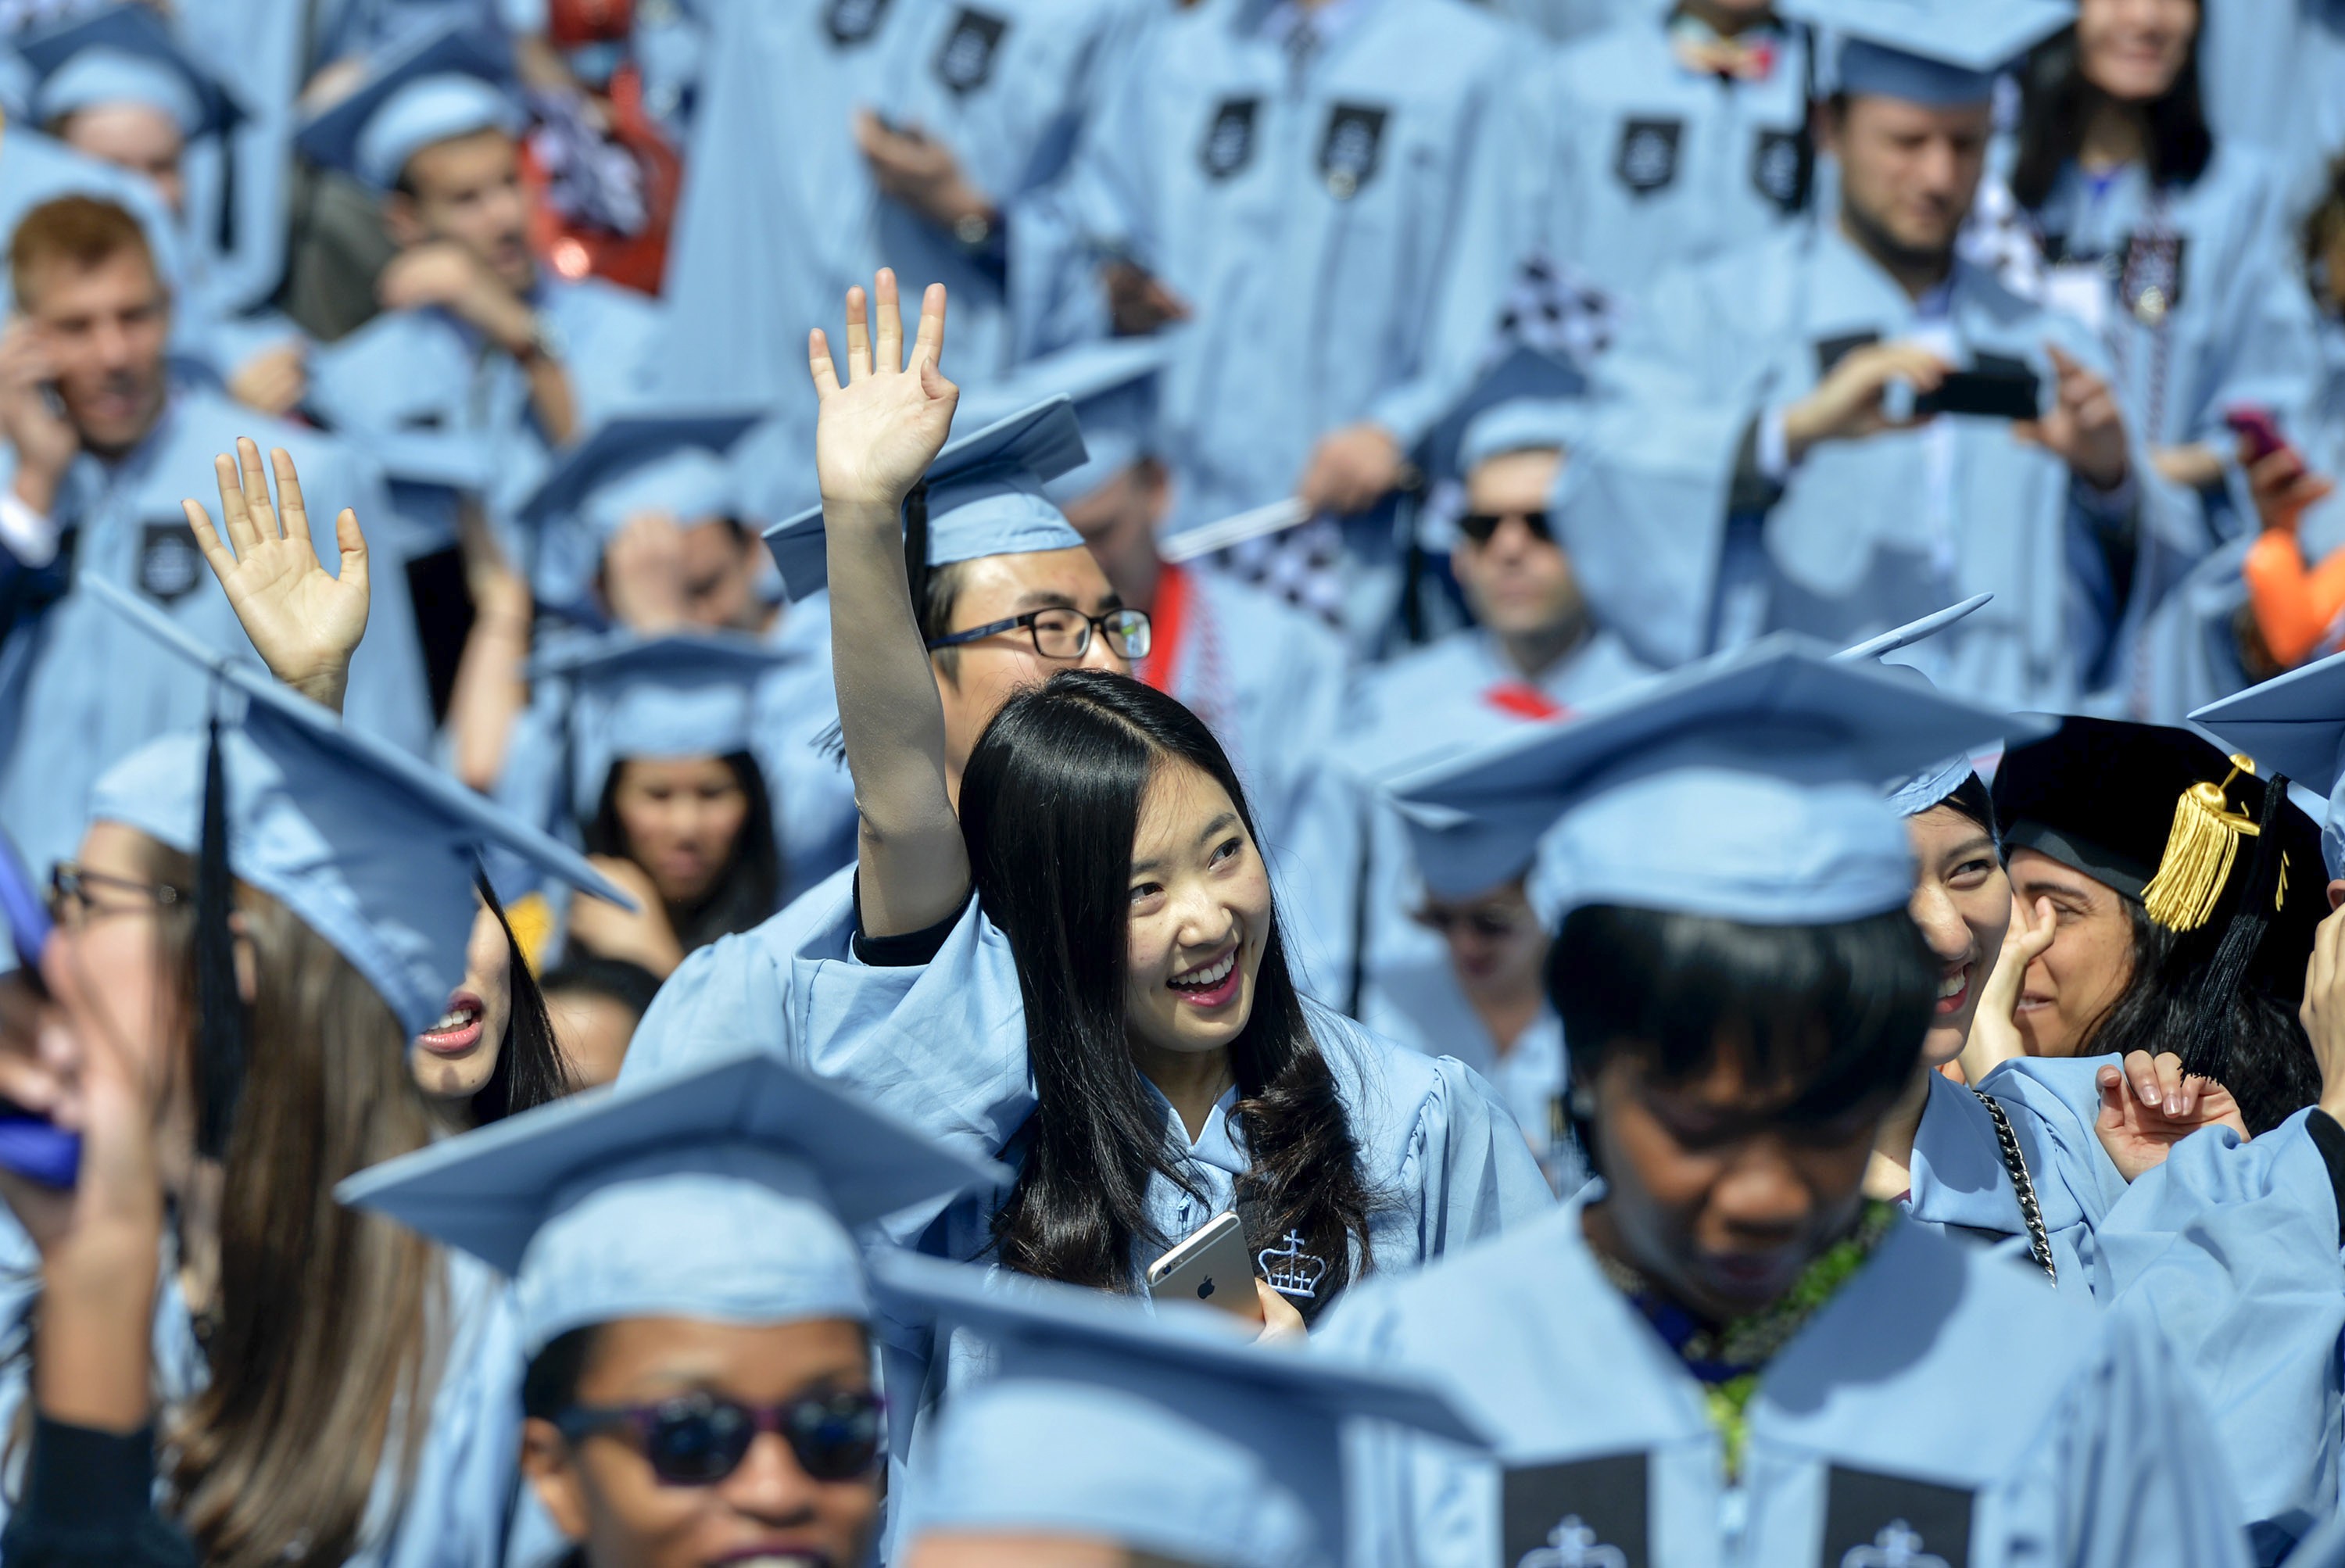 Chinese graduates of Columbia University attend the commencement ceremony in New York City in 2015. Improvements in education attainment have encouraged more women to strike out on their own. More Chinese are attending university overseas, and many return home to start a business. Photo: Xinhua